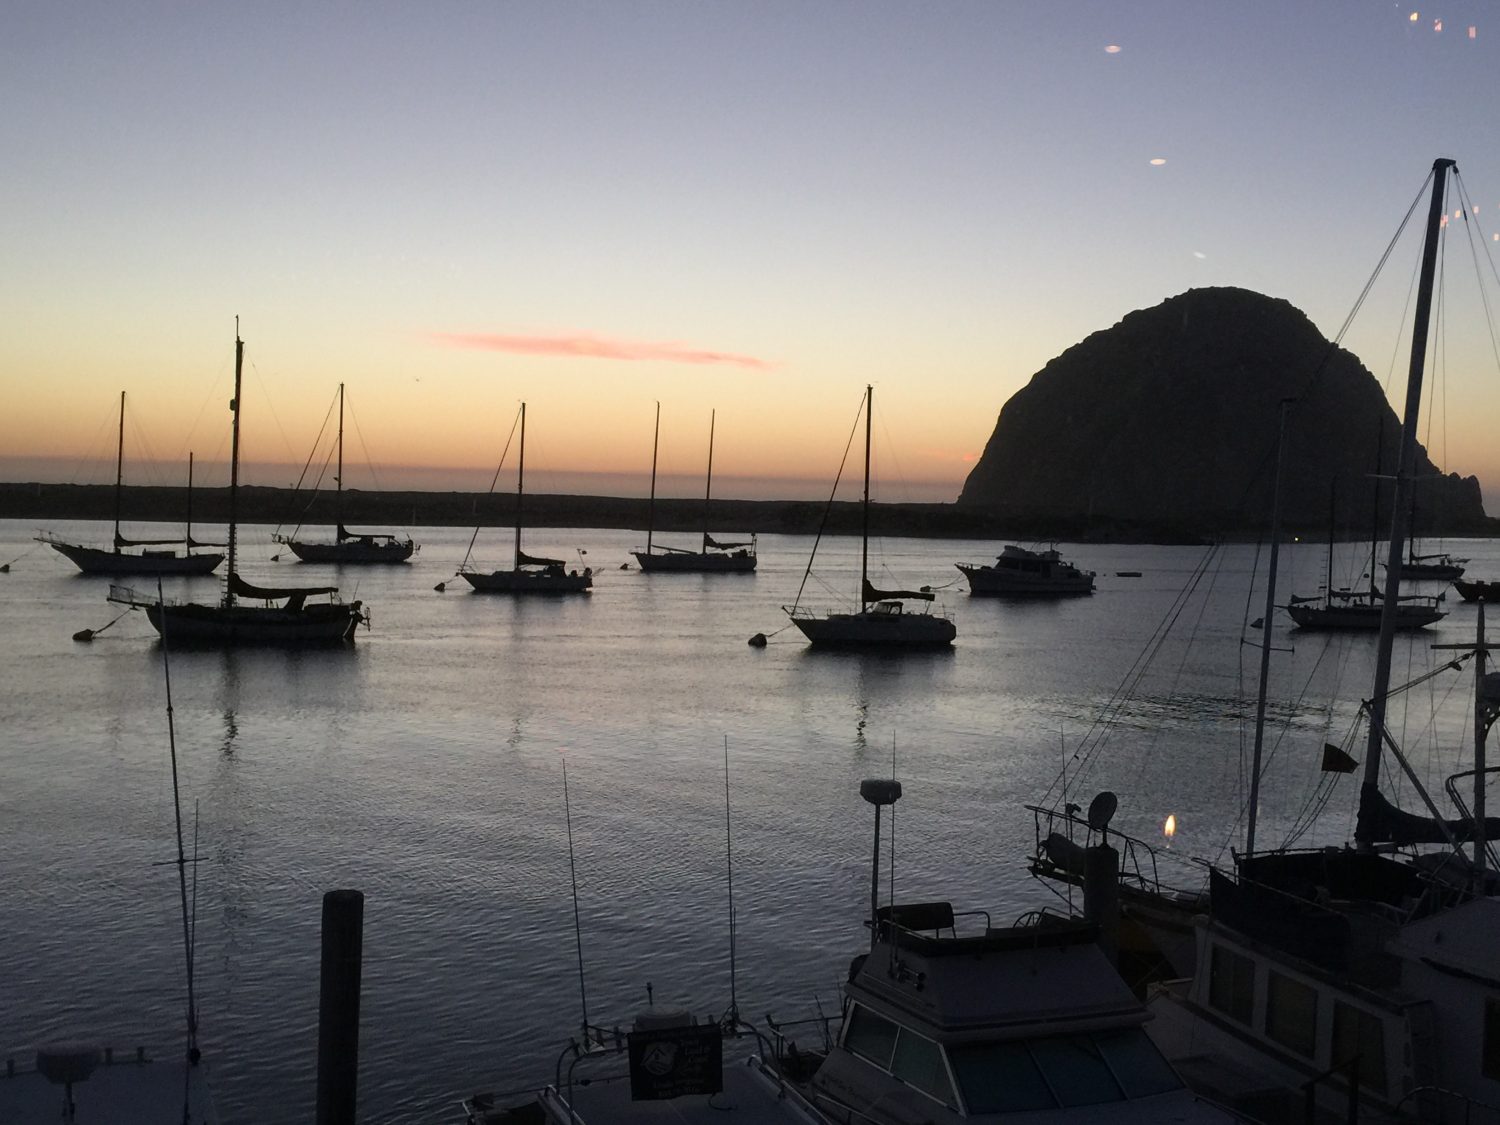 Morro Bay, California  Peacefully adventure. Travel and live